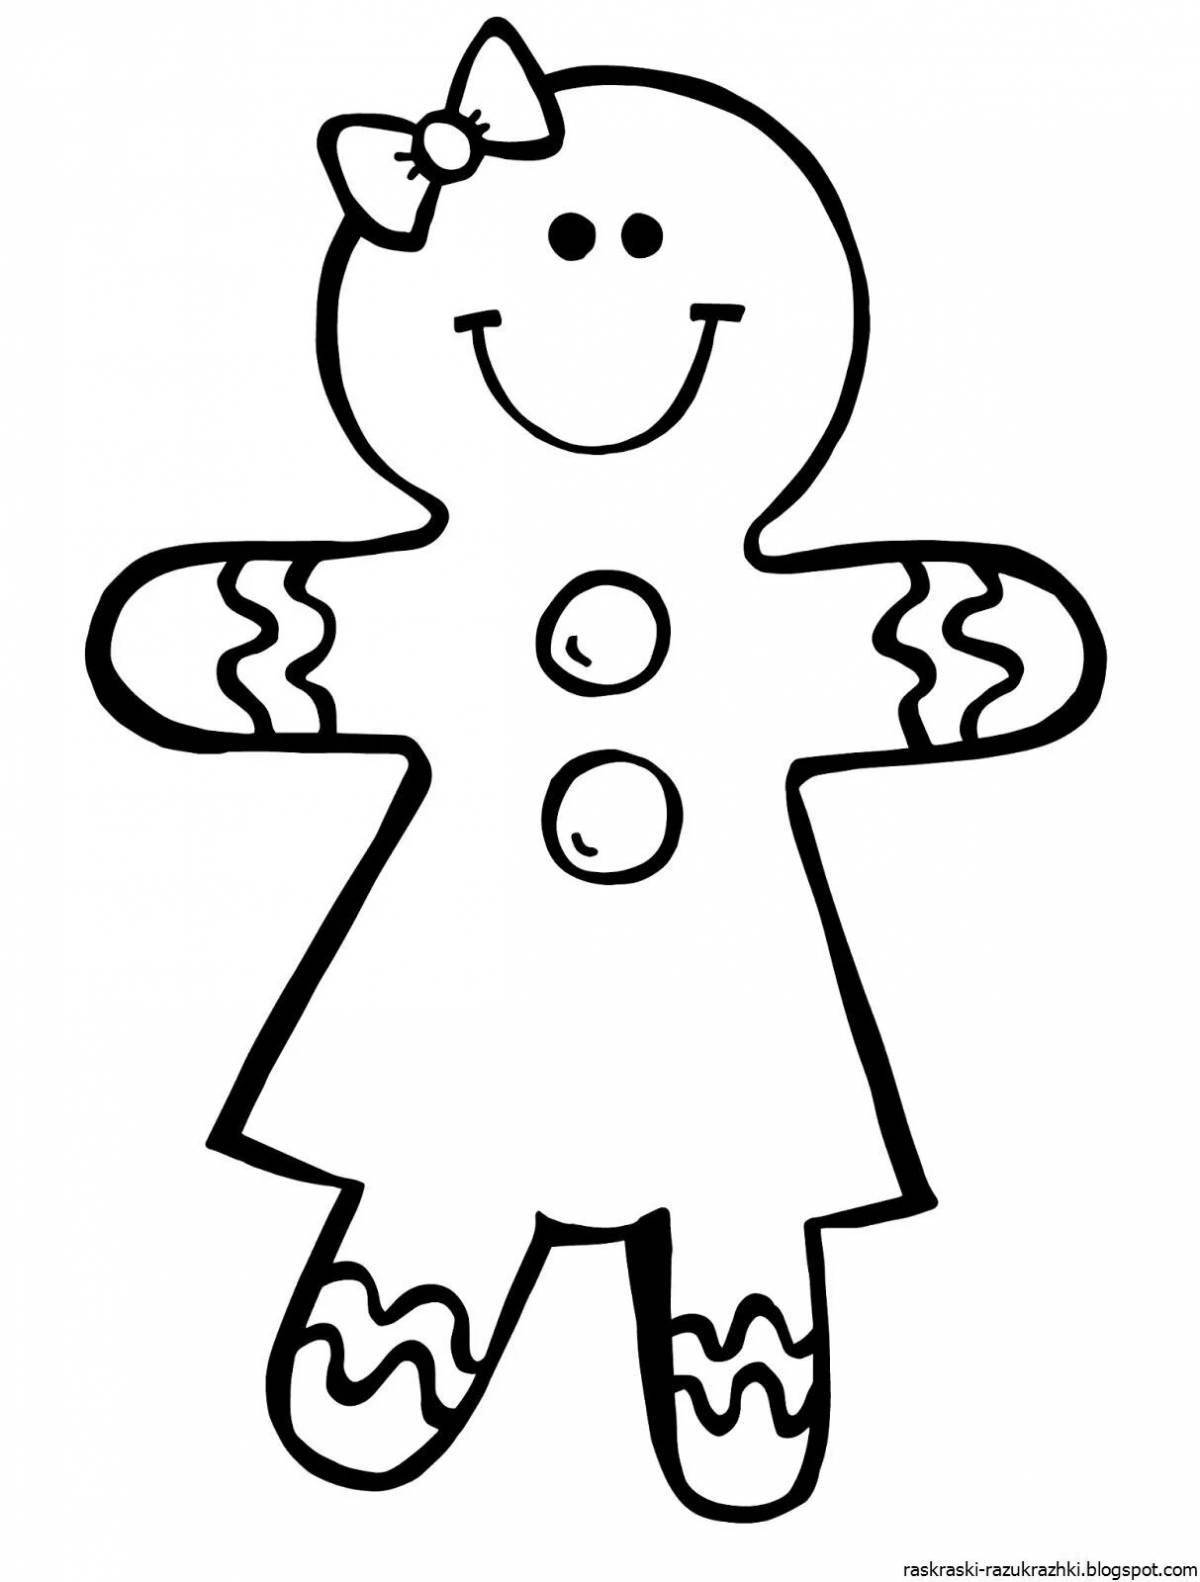 Coloring page incredible gingerbread man